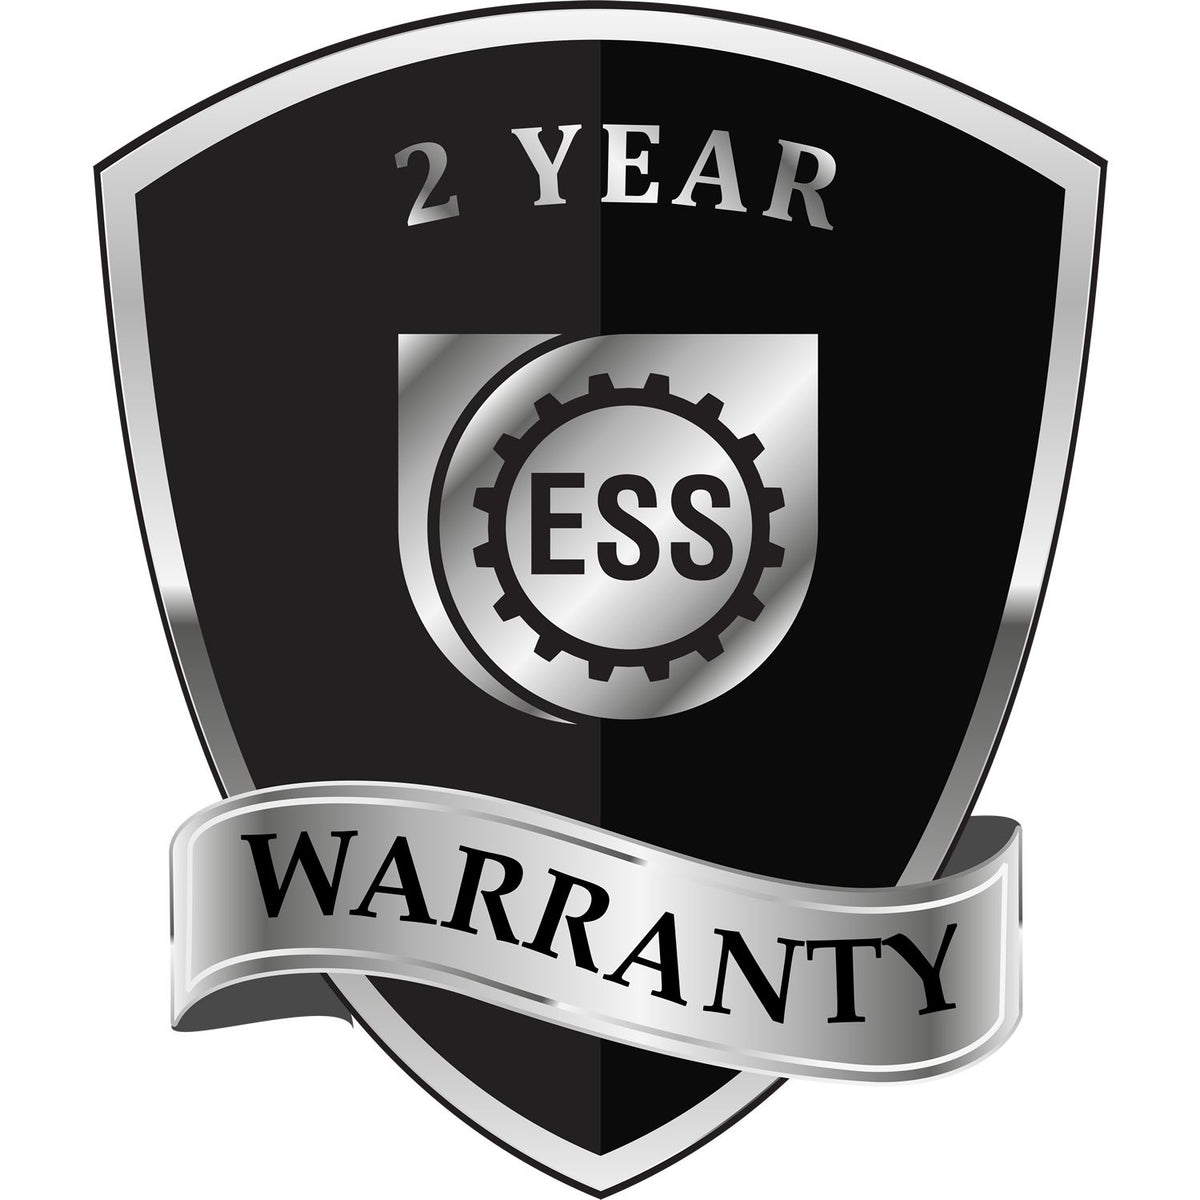 A badge or emblem showing a warranty icon for the Long Reach West Virginia PE Seal